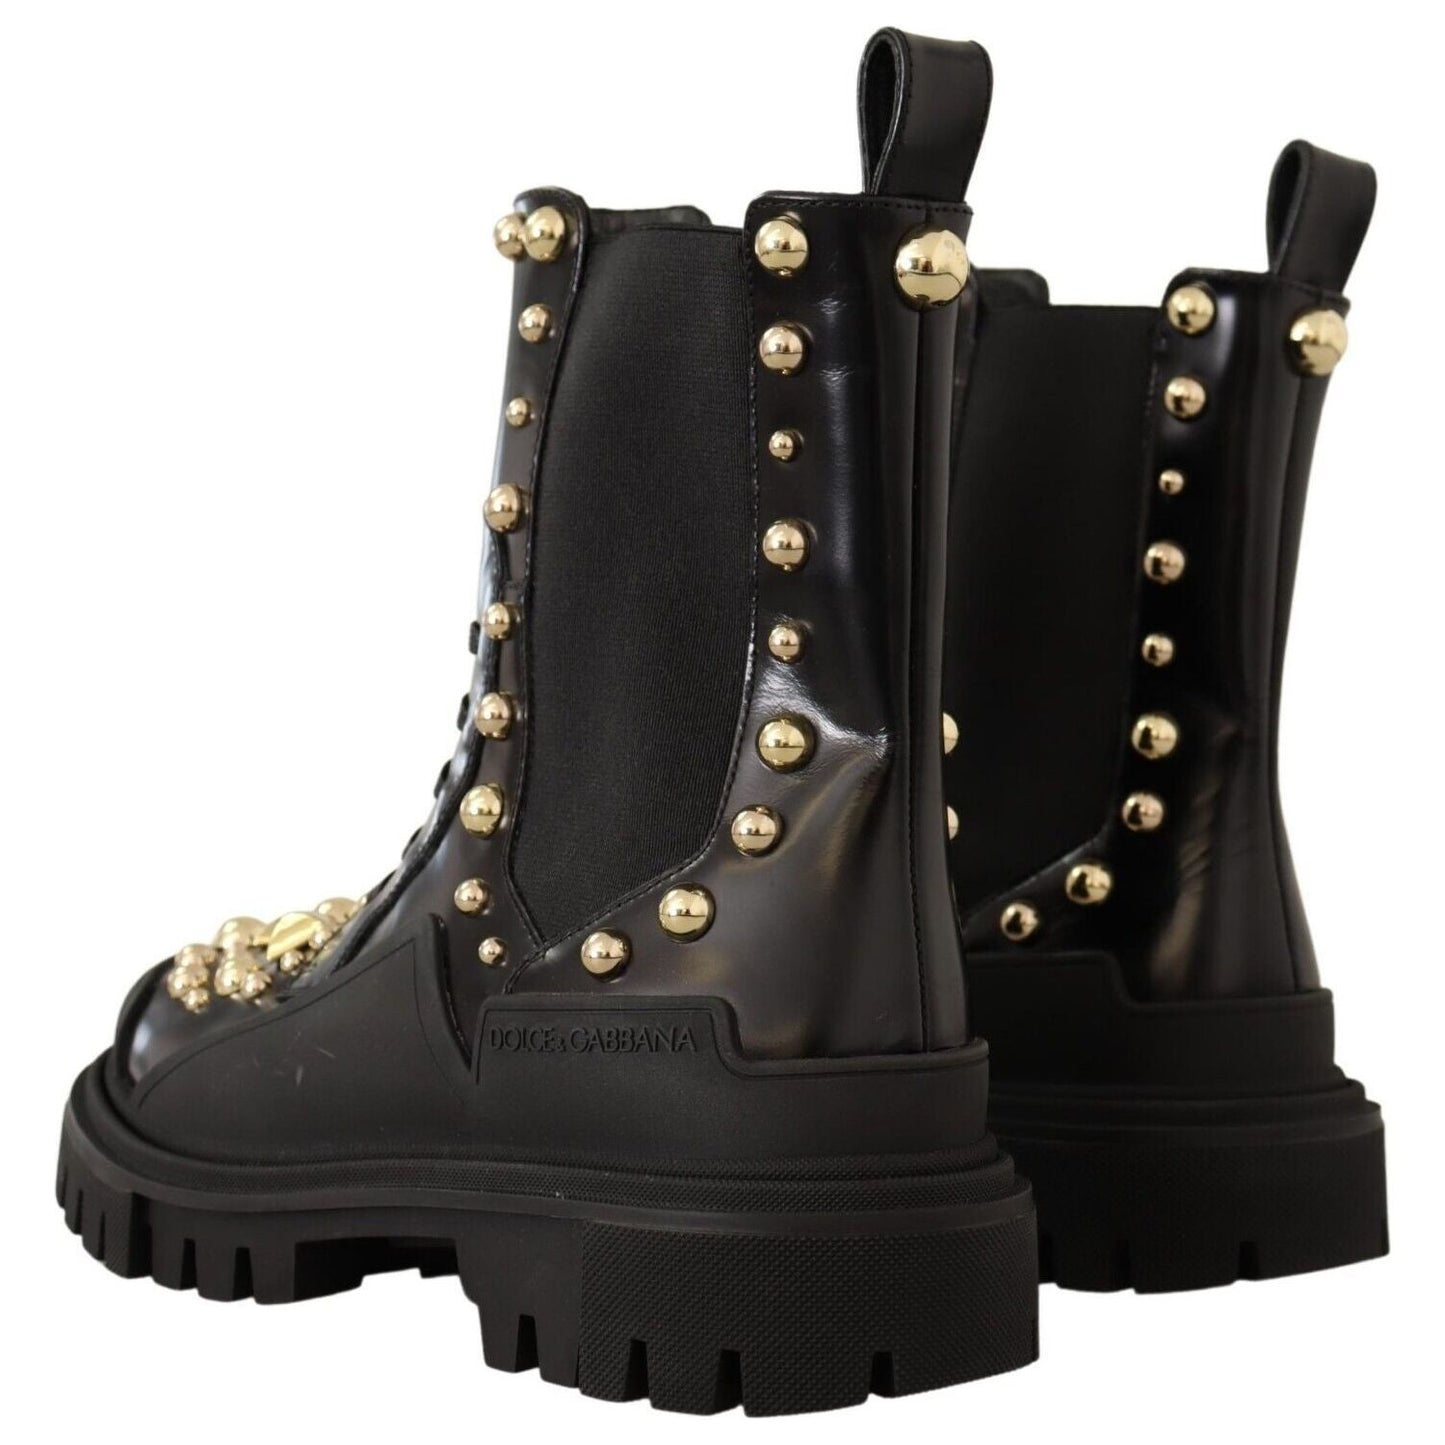 Dolce & Gabbana Studded Leather Combat Boots with Embroidery WOMAN BOOTS black-leather-studded-combat-boots